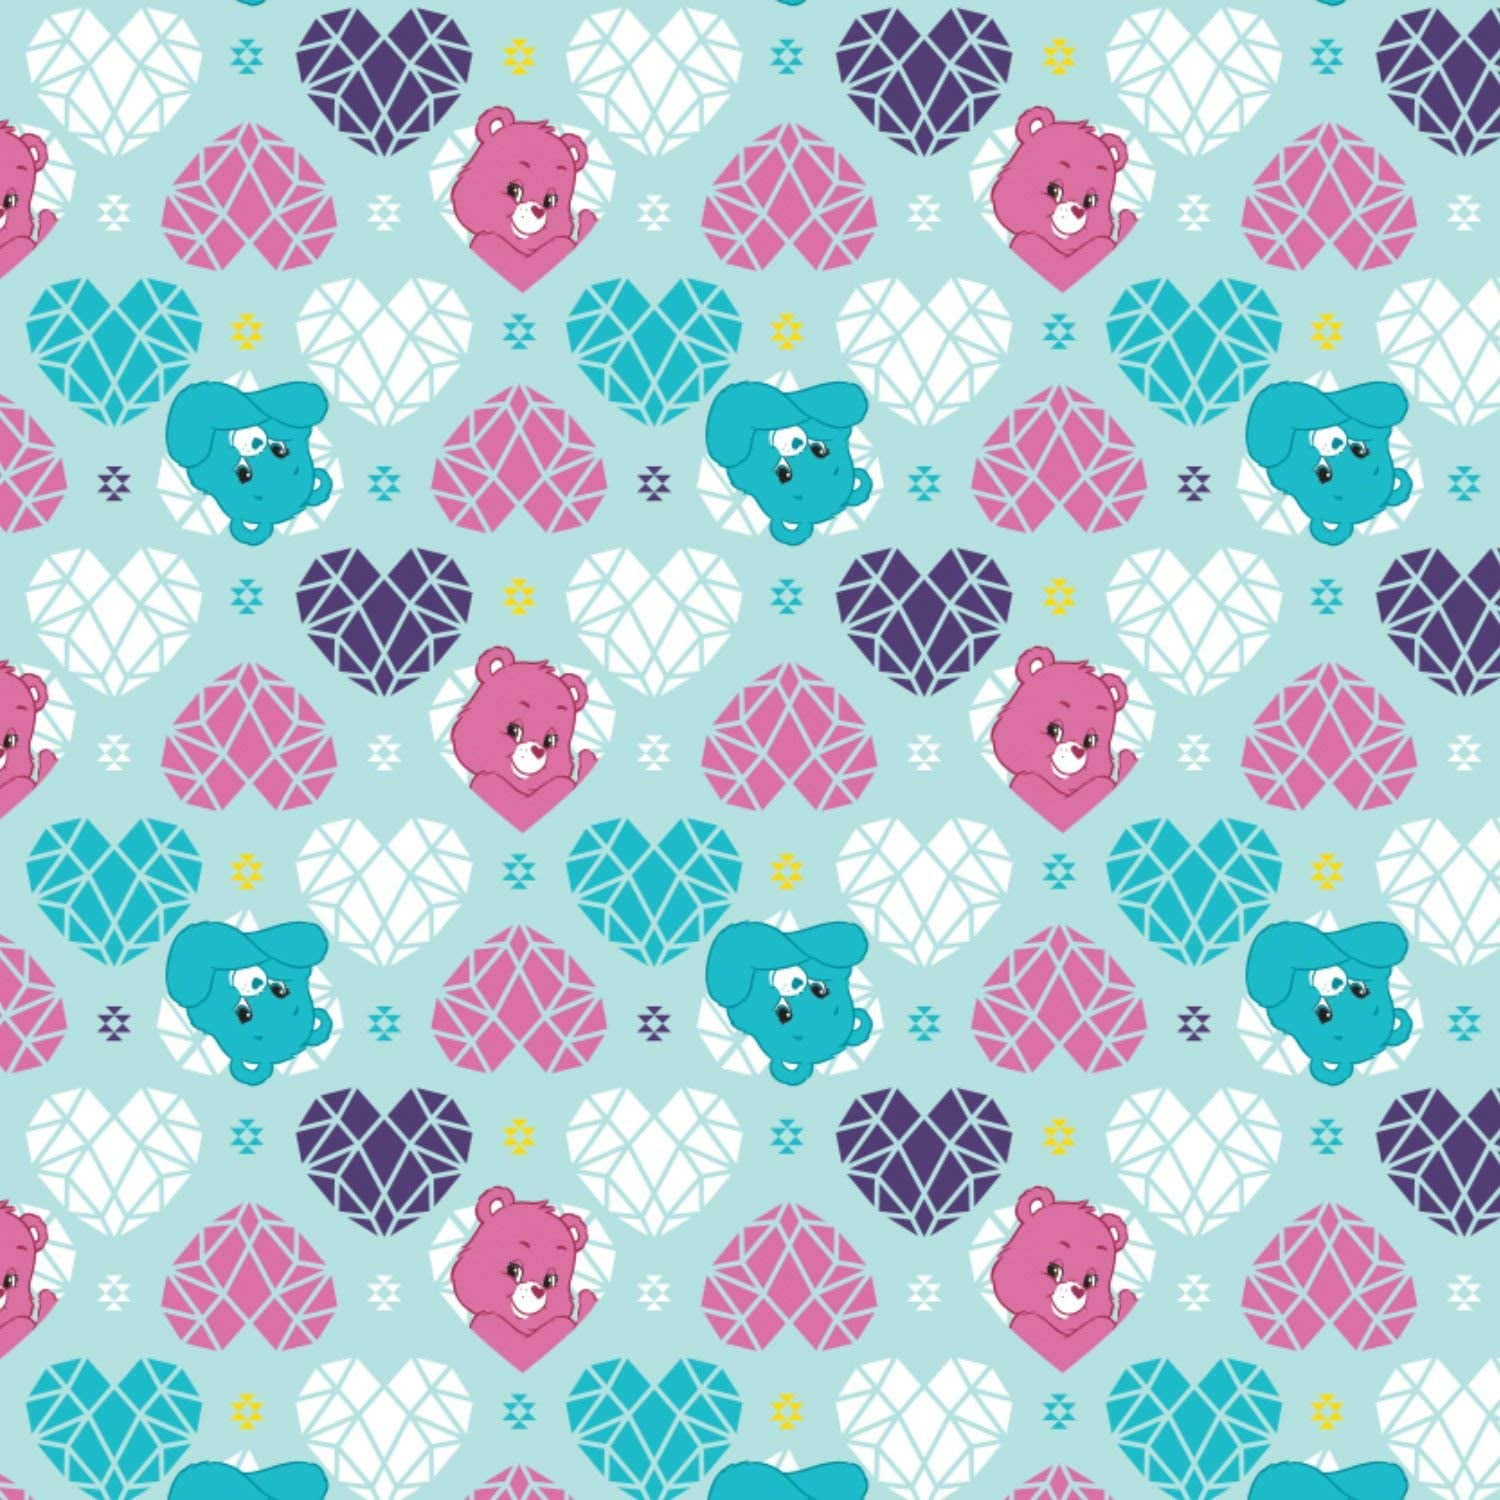 SHINE BRIGHT TOSSED BEARS Teal Turquoise 100% cotton fabric by the yard 